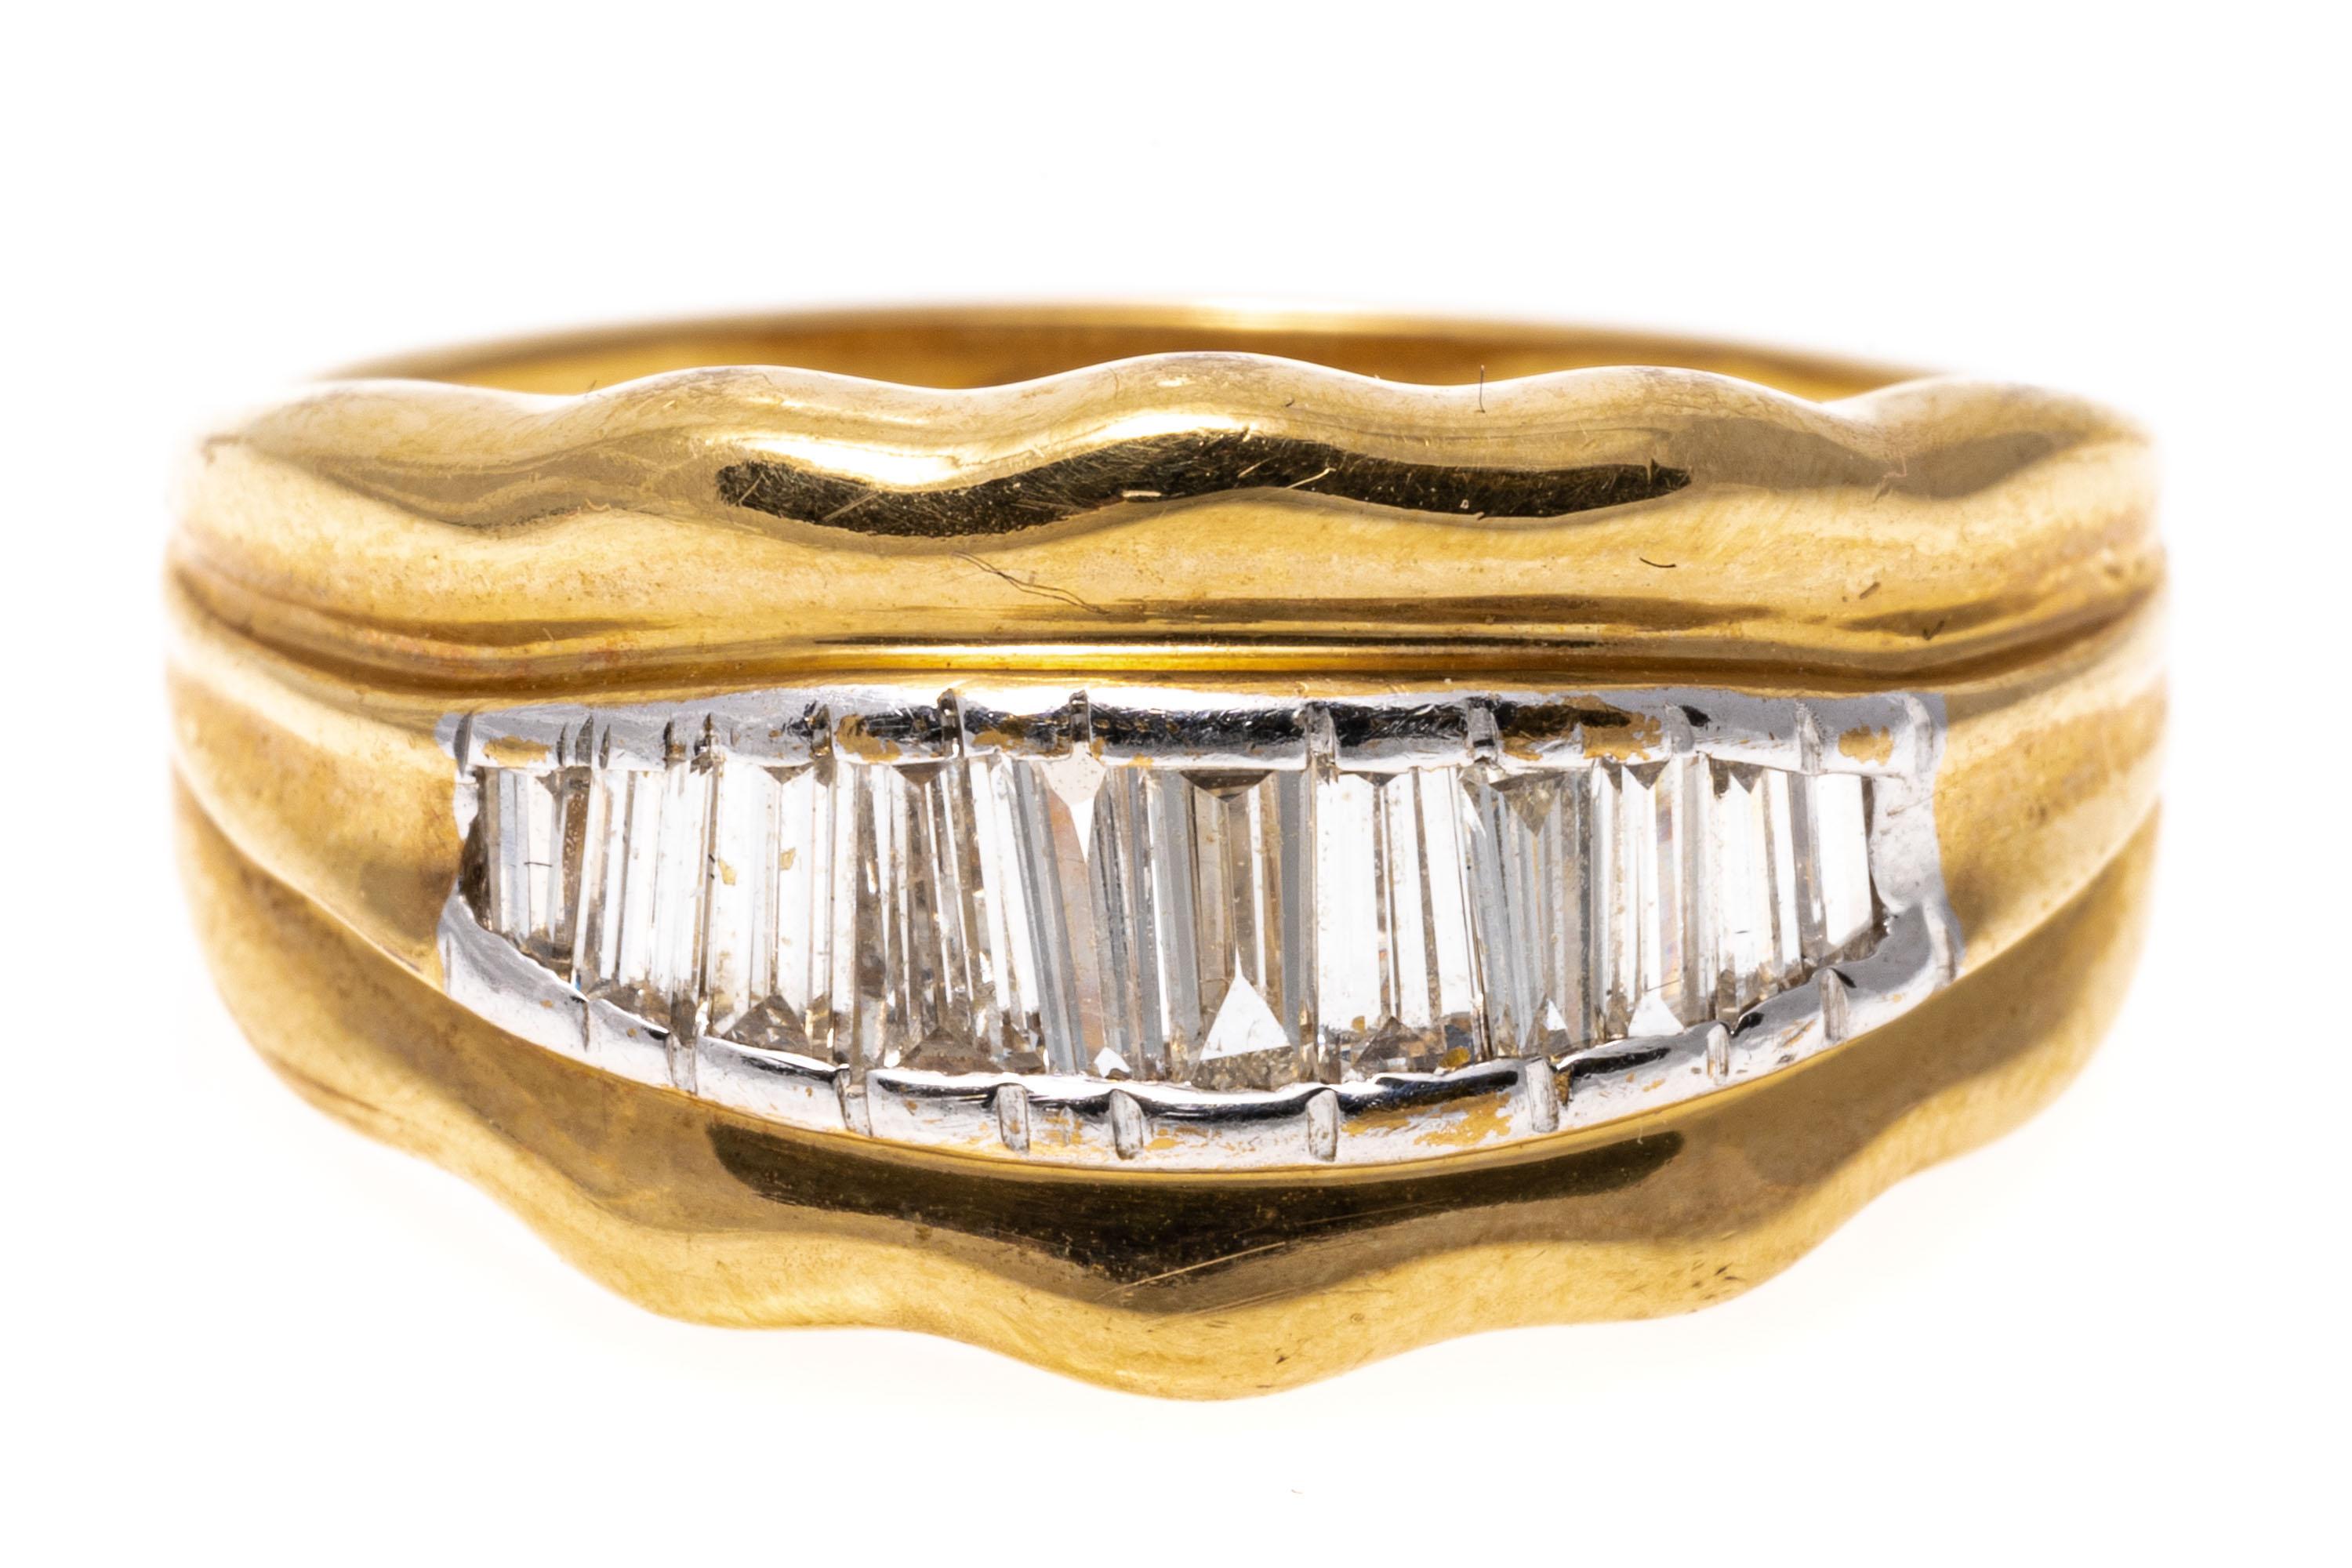 14k yellow gold ring. This interesting ring features a center row of graduated, baguette cut diamonds, channel set, approximately 0.31 TCW and framed by a tapered gold frame, finished with a scalloped edge.
Marks: 14k
Dimensions: 9/16